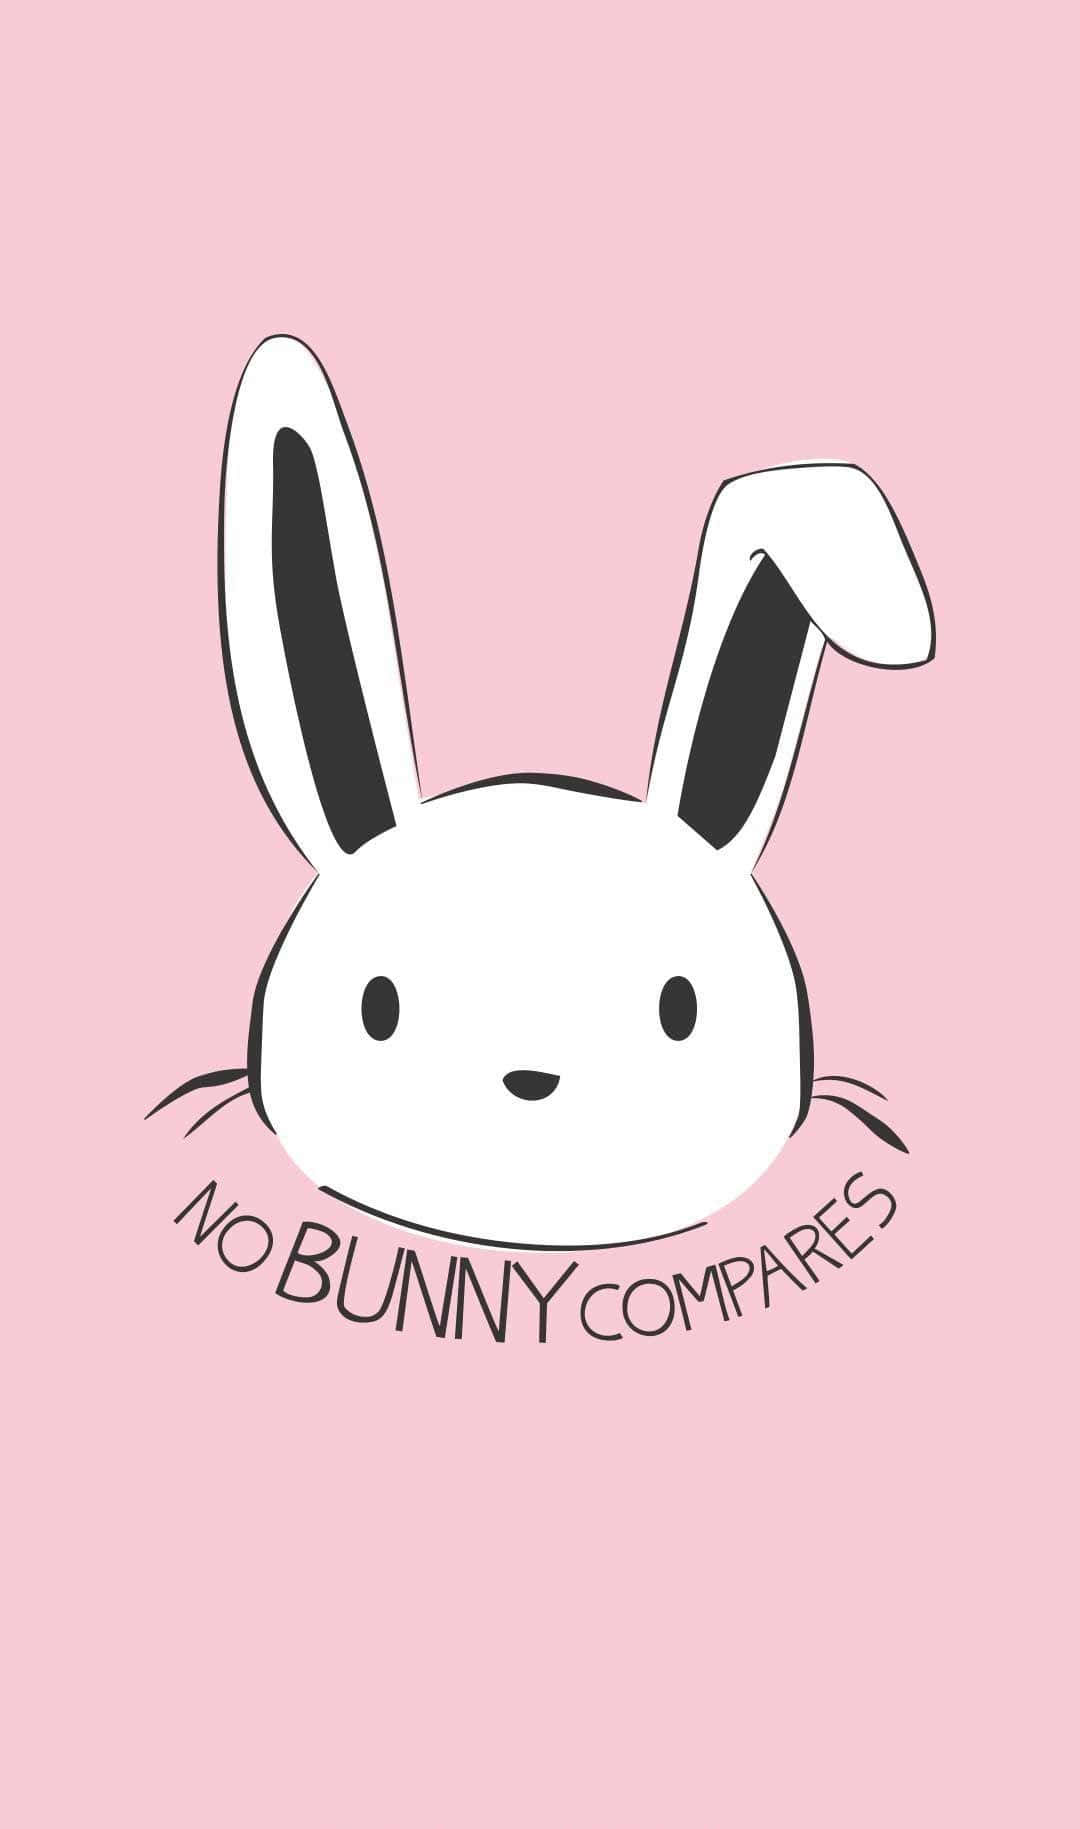 A soft and fluffy Pink Bunny Wallpaper